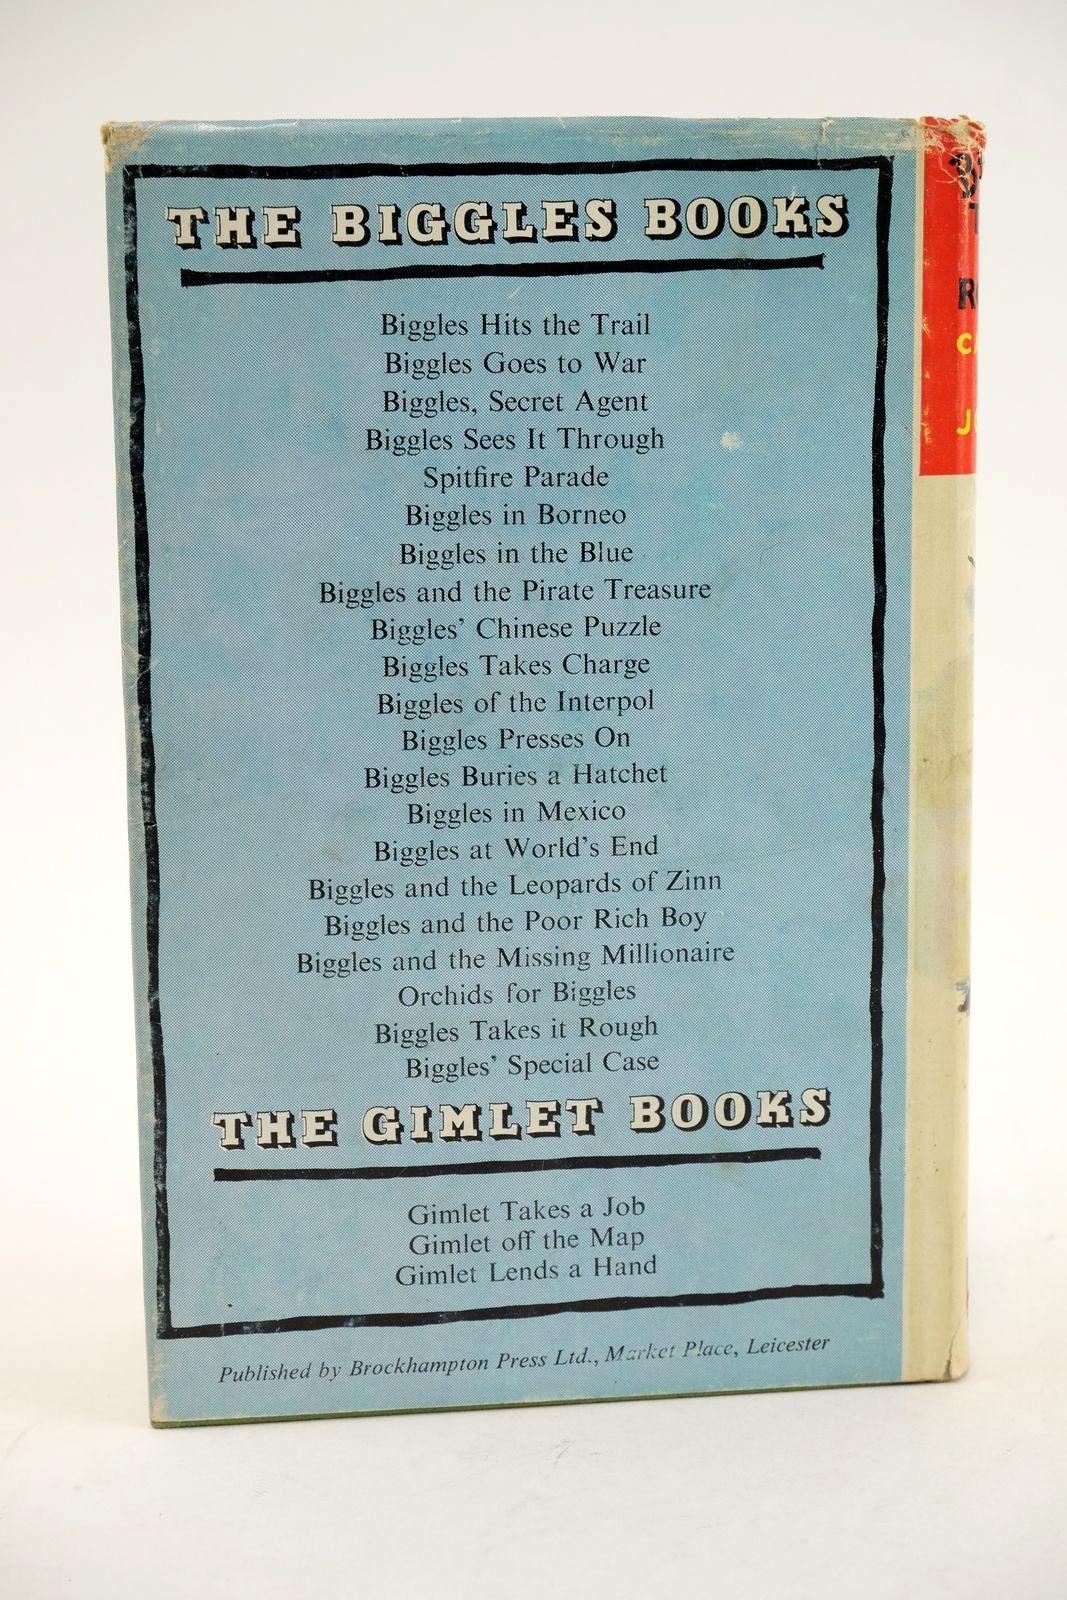 Photo of BIGGLES TAKES IT ROUGH written by Johns, W.E. illustrated by Stead, Leslie published by Brockhampton Press (STOCK CODE: 1324040)  for sale by Stella & Rose's Books